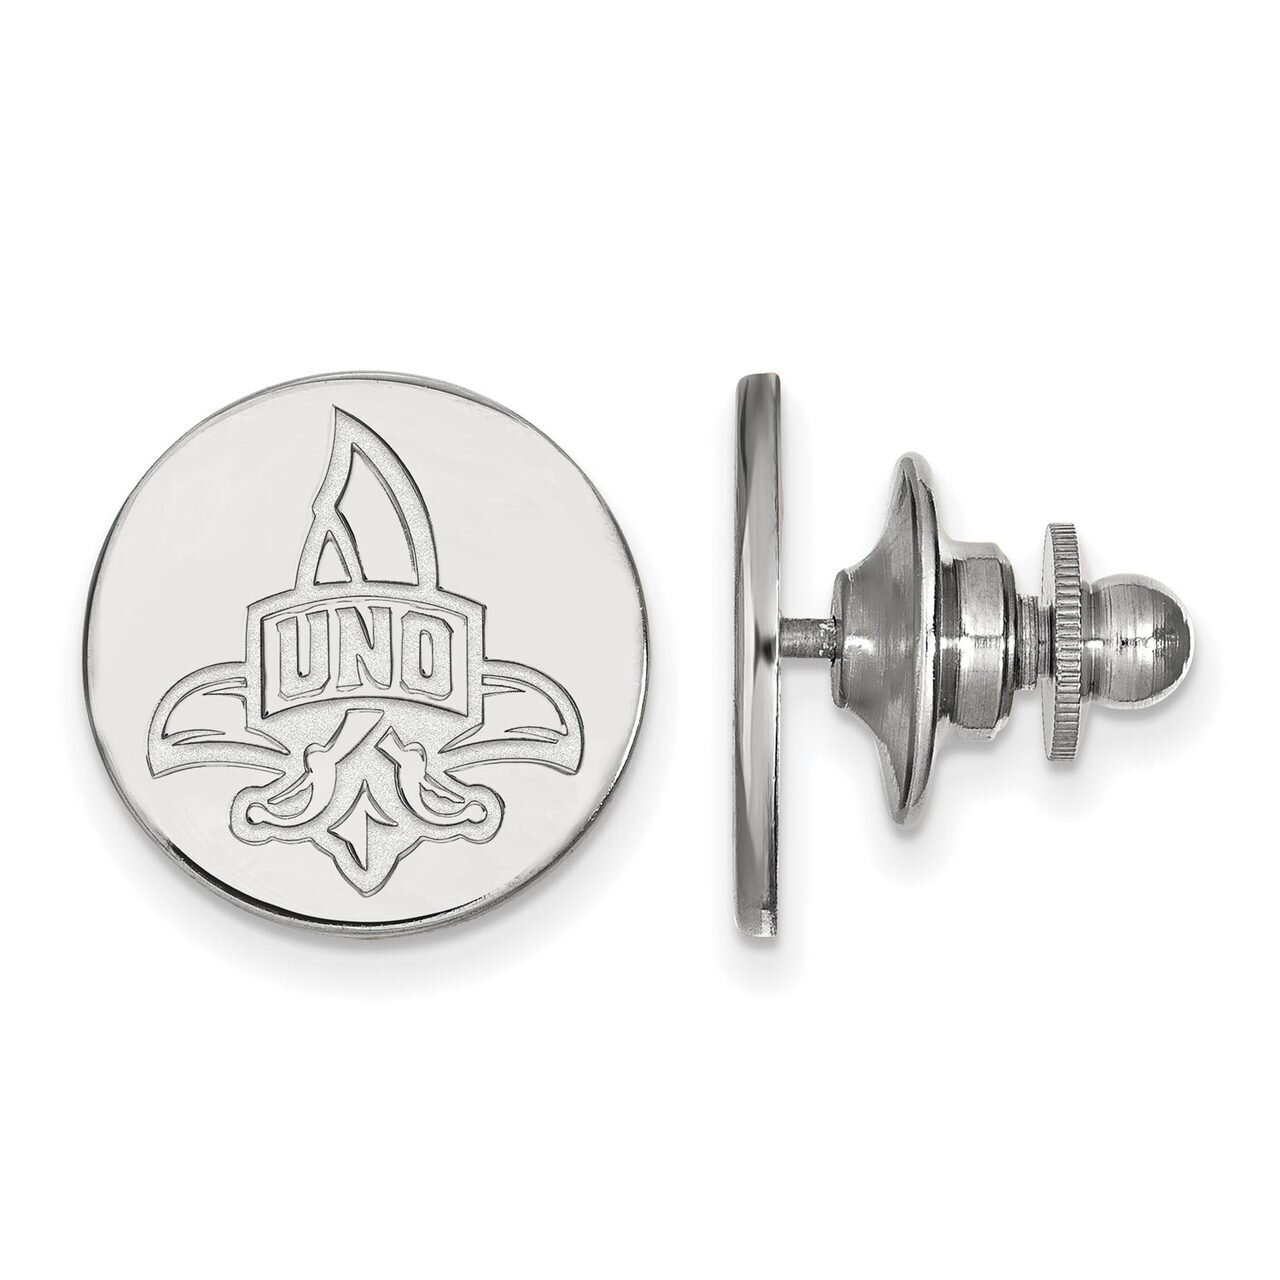 University of New Orleans Lapel Pin 14k White Gold 4W007UNO